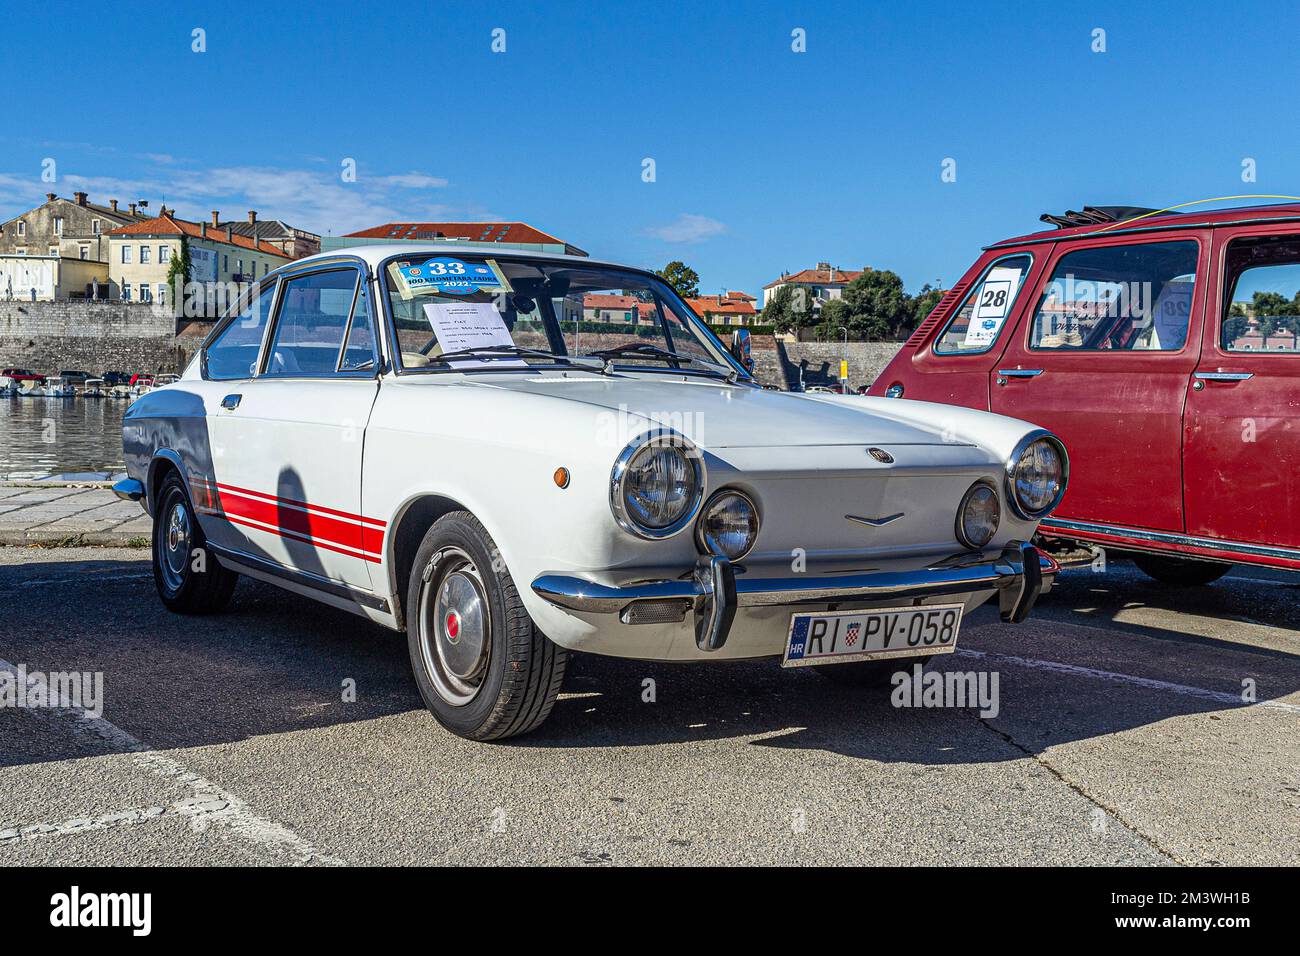 A vintage old-timer, the Italian Fiat 850 sport coupe from 1968 outdoors in sunny weather Stock Photo